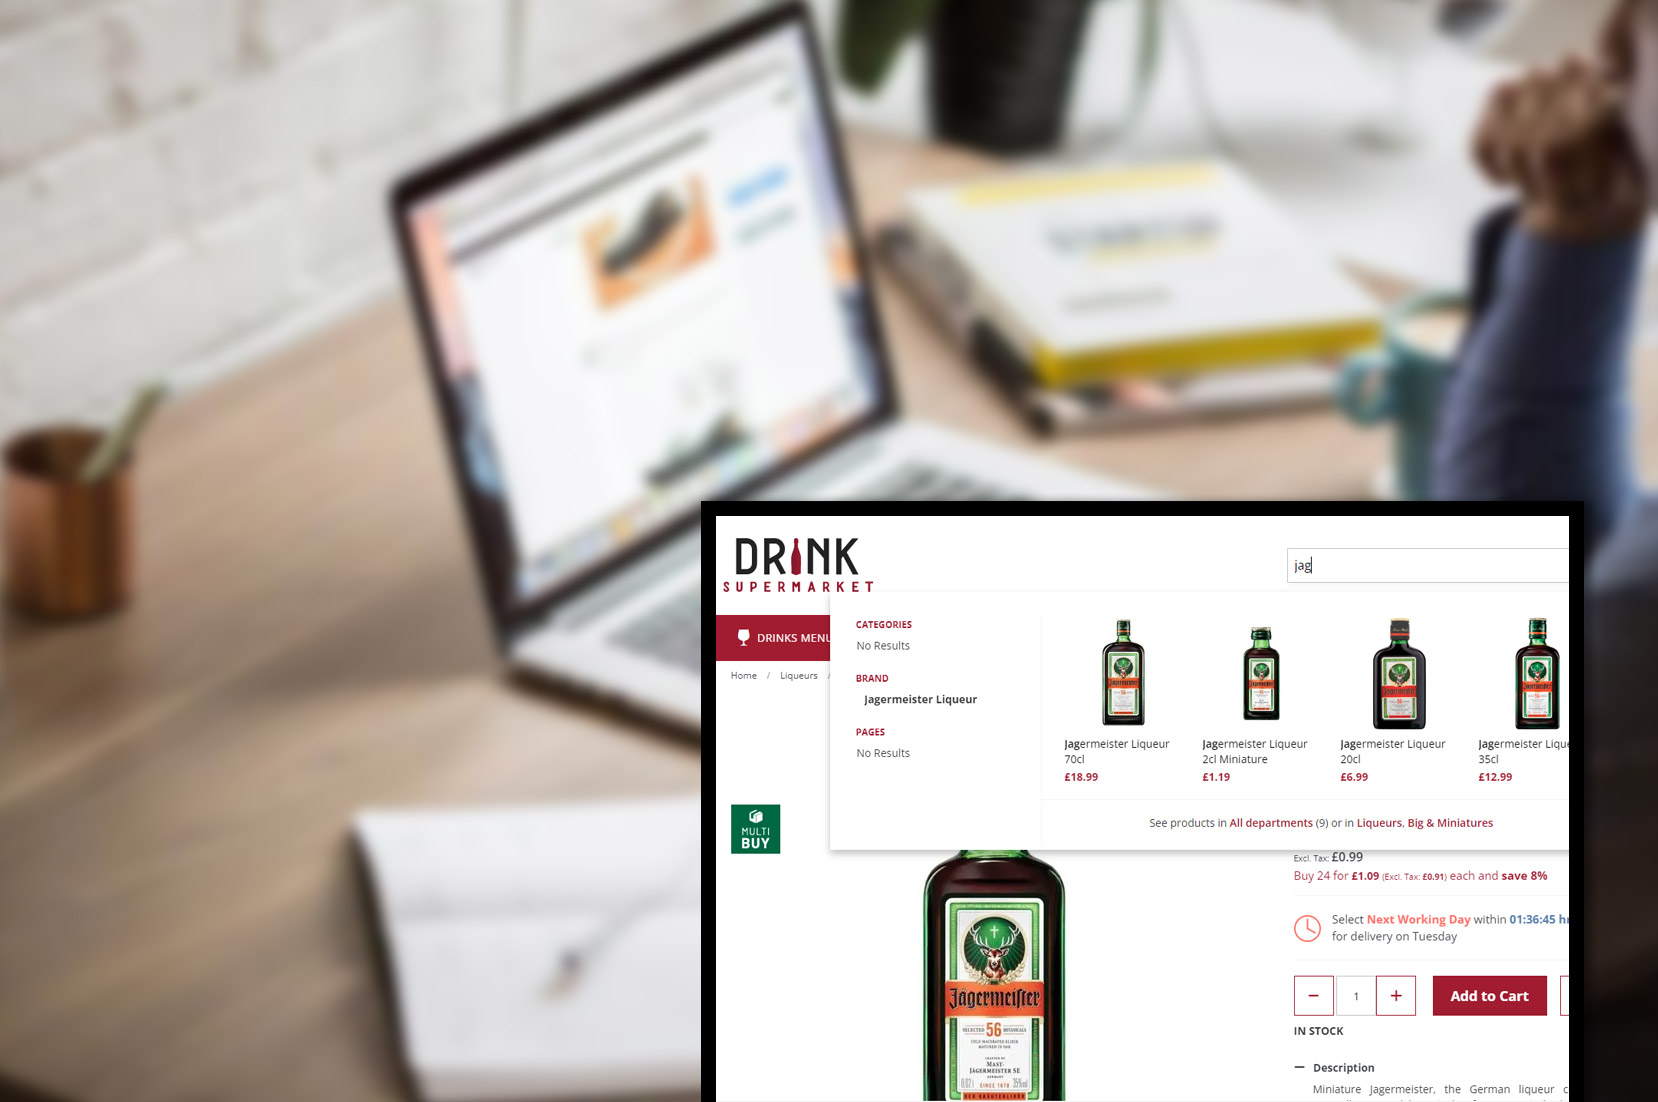 drinksupermarket-comproduct-categories-keywords-and-brand-scraping-services